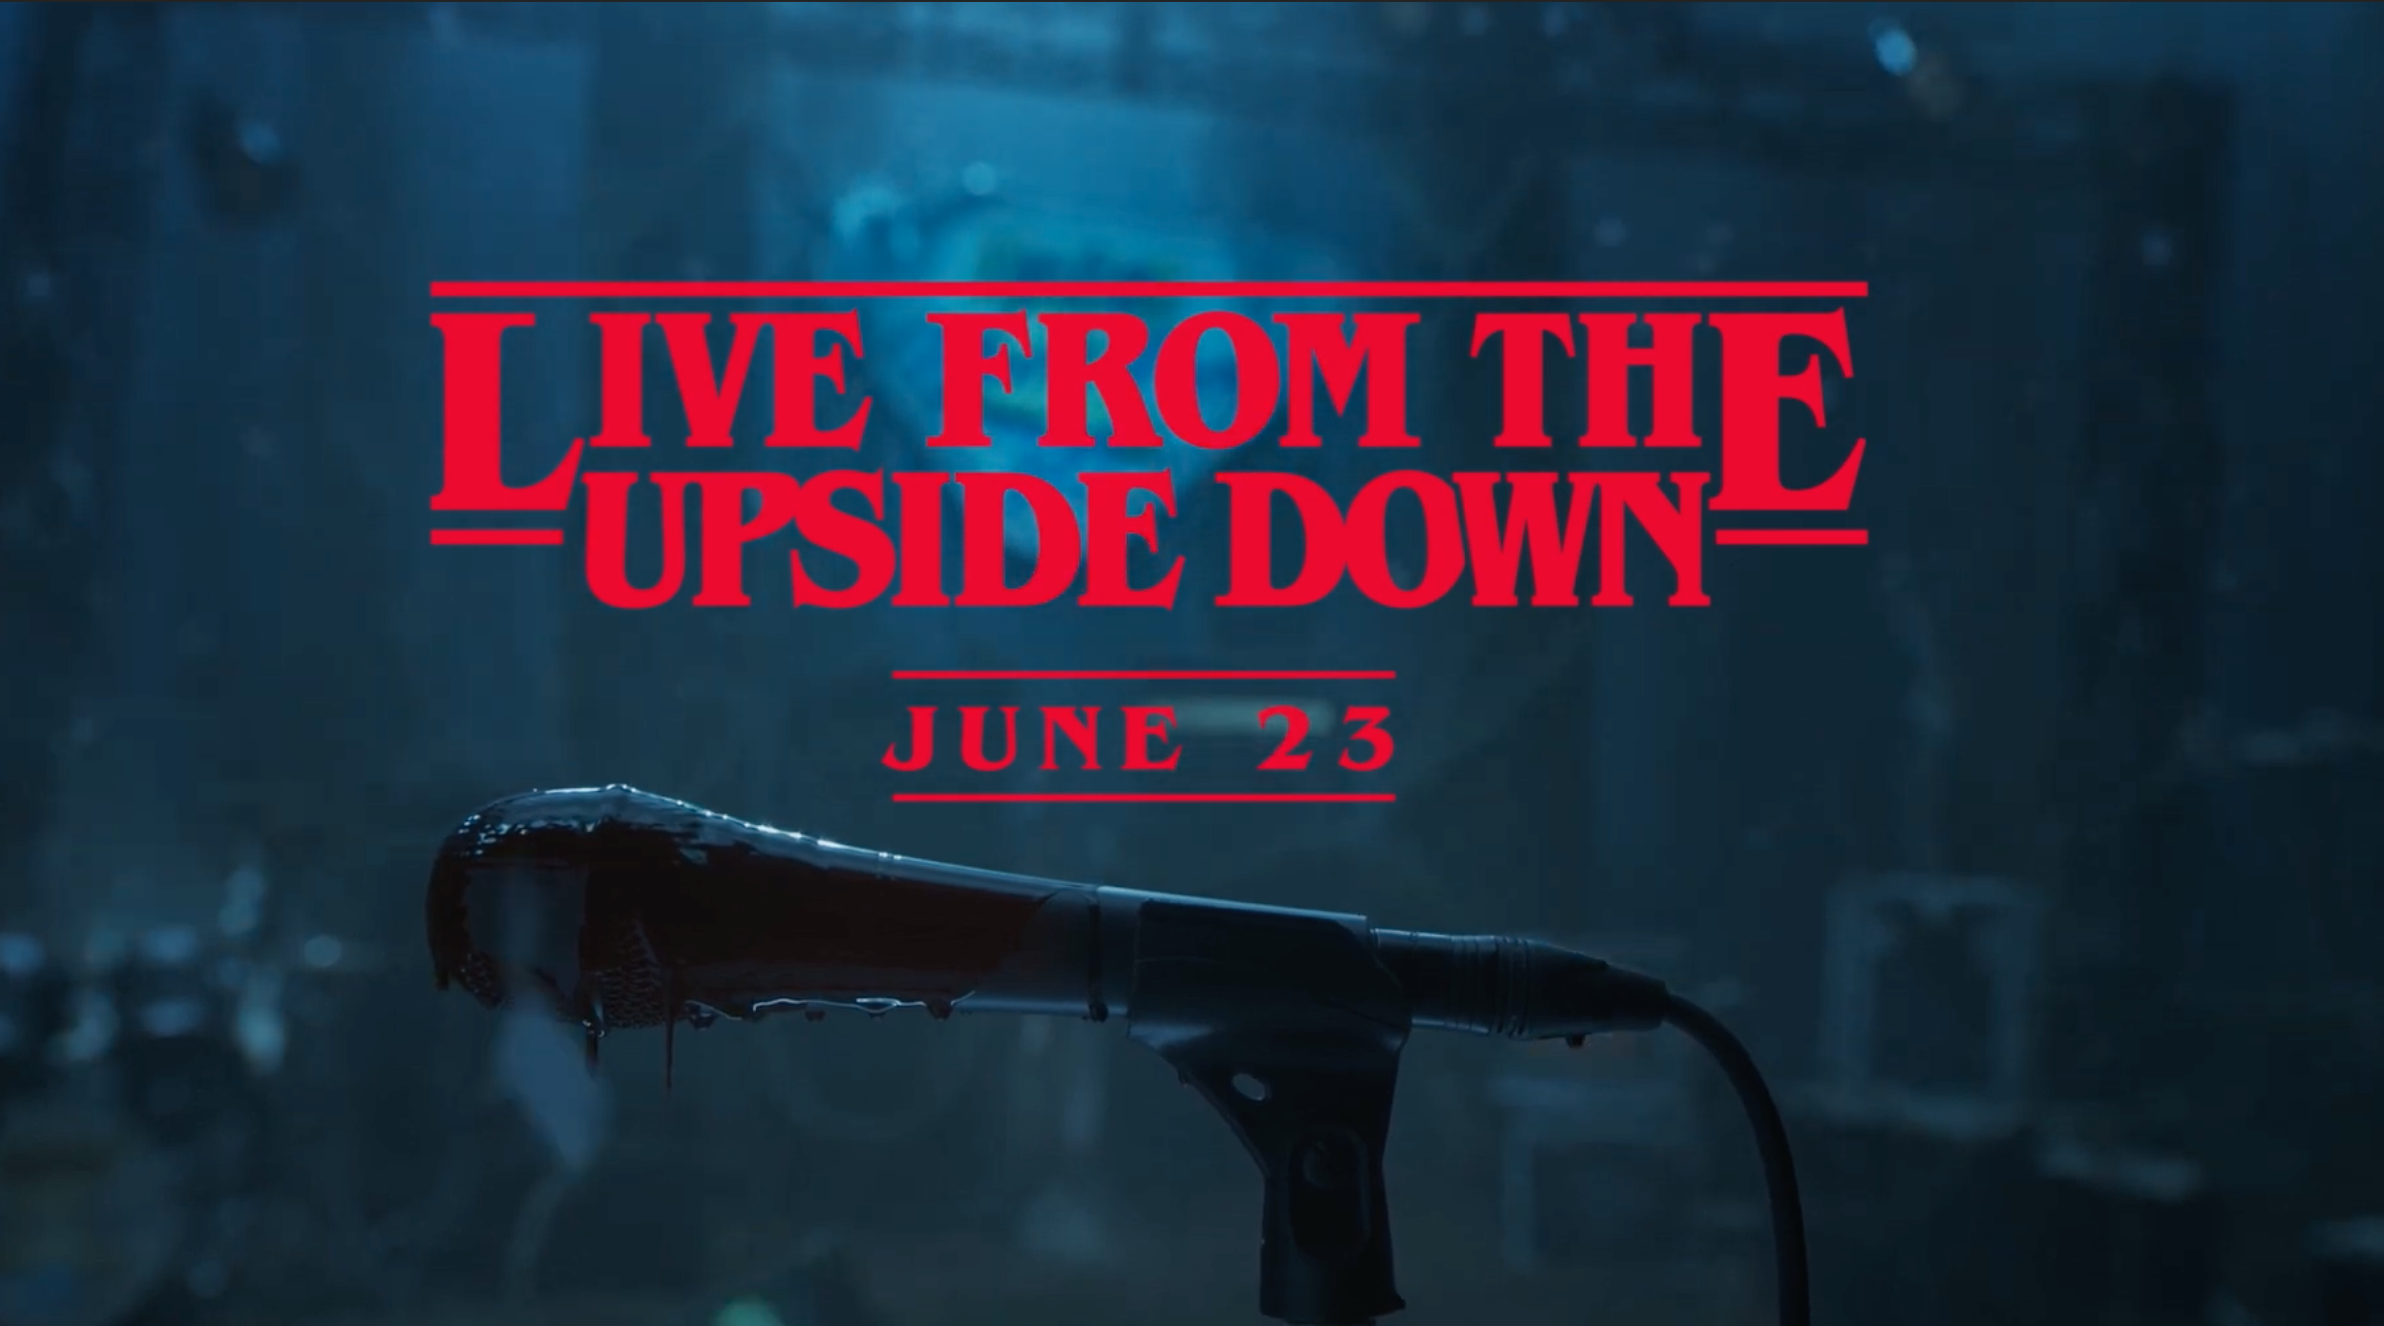 Live from the Upside Down